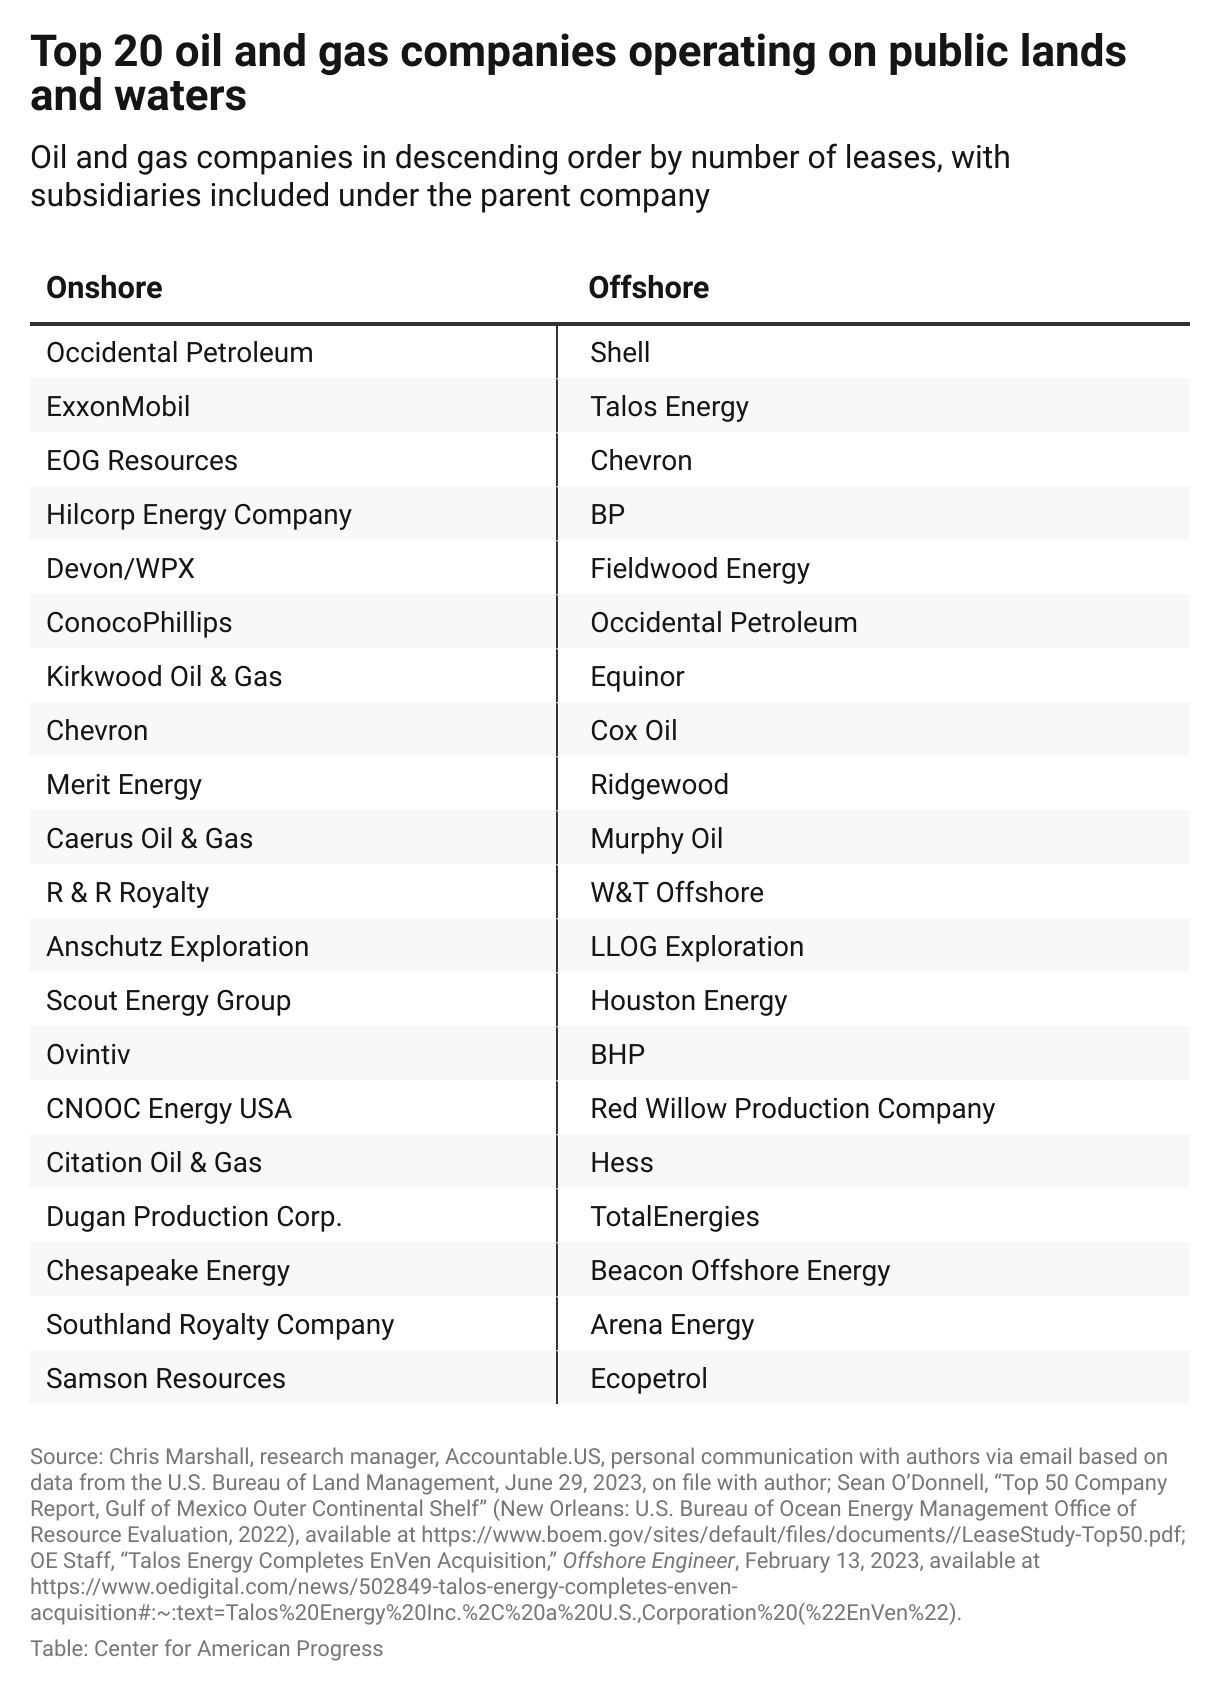 Names of the top 20 oil and gas companies operating on U.S. public lands and waters, ranked in descending order based on number of leases with subsidiaries included under the parent company.